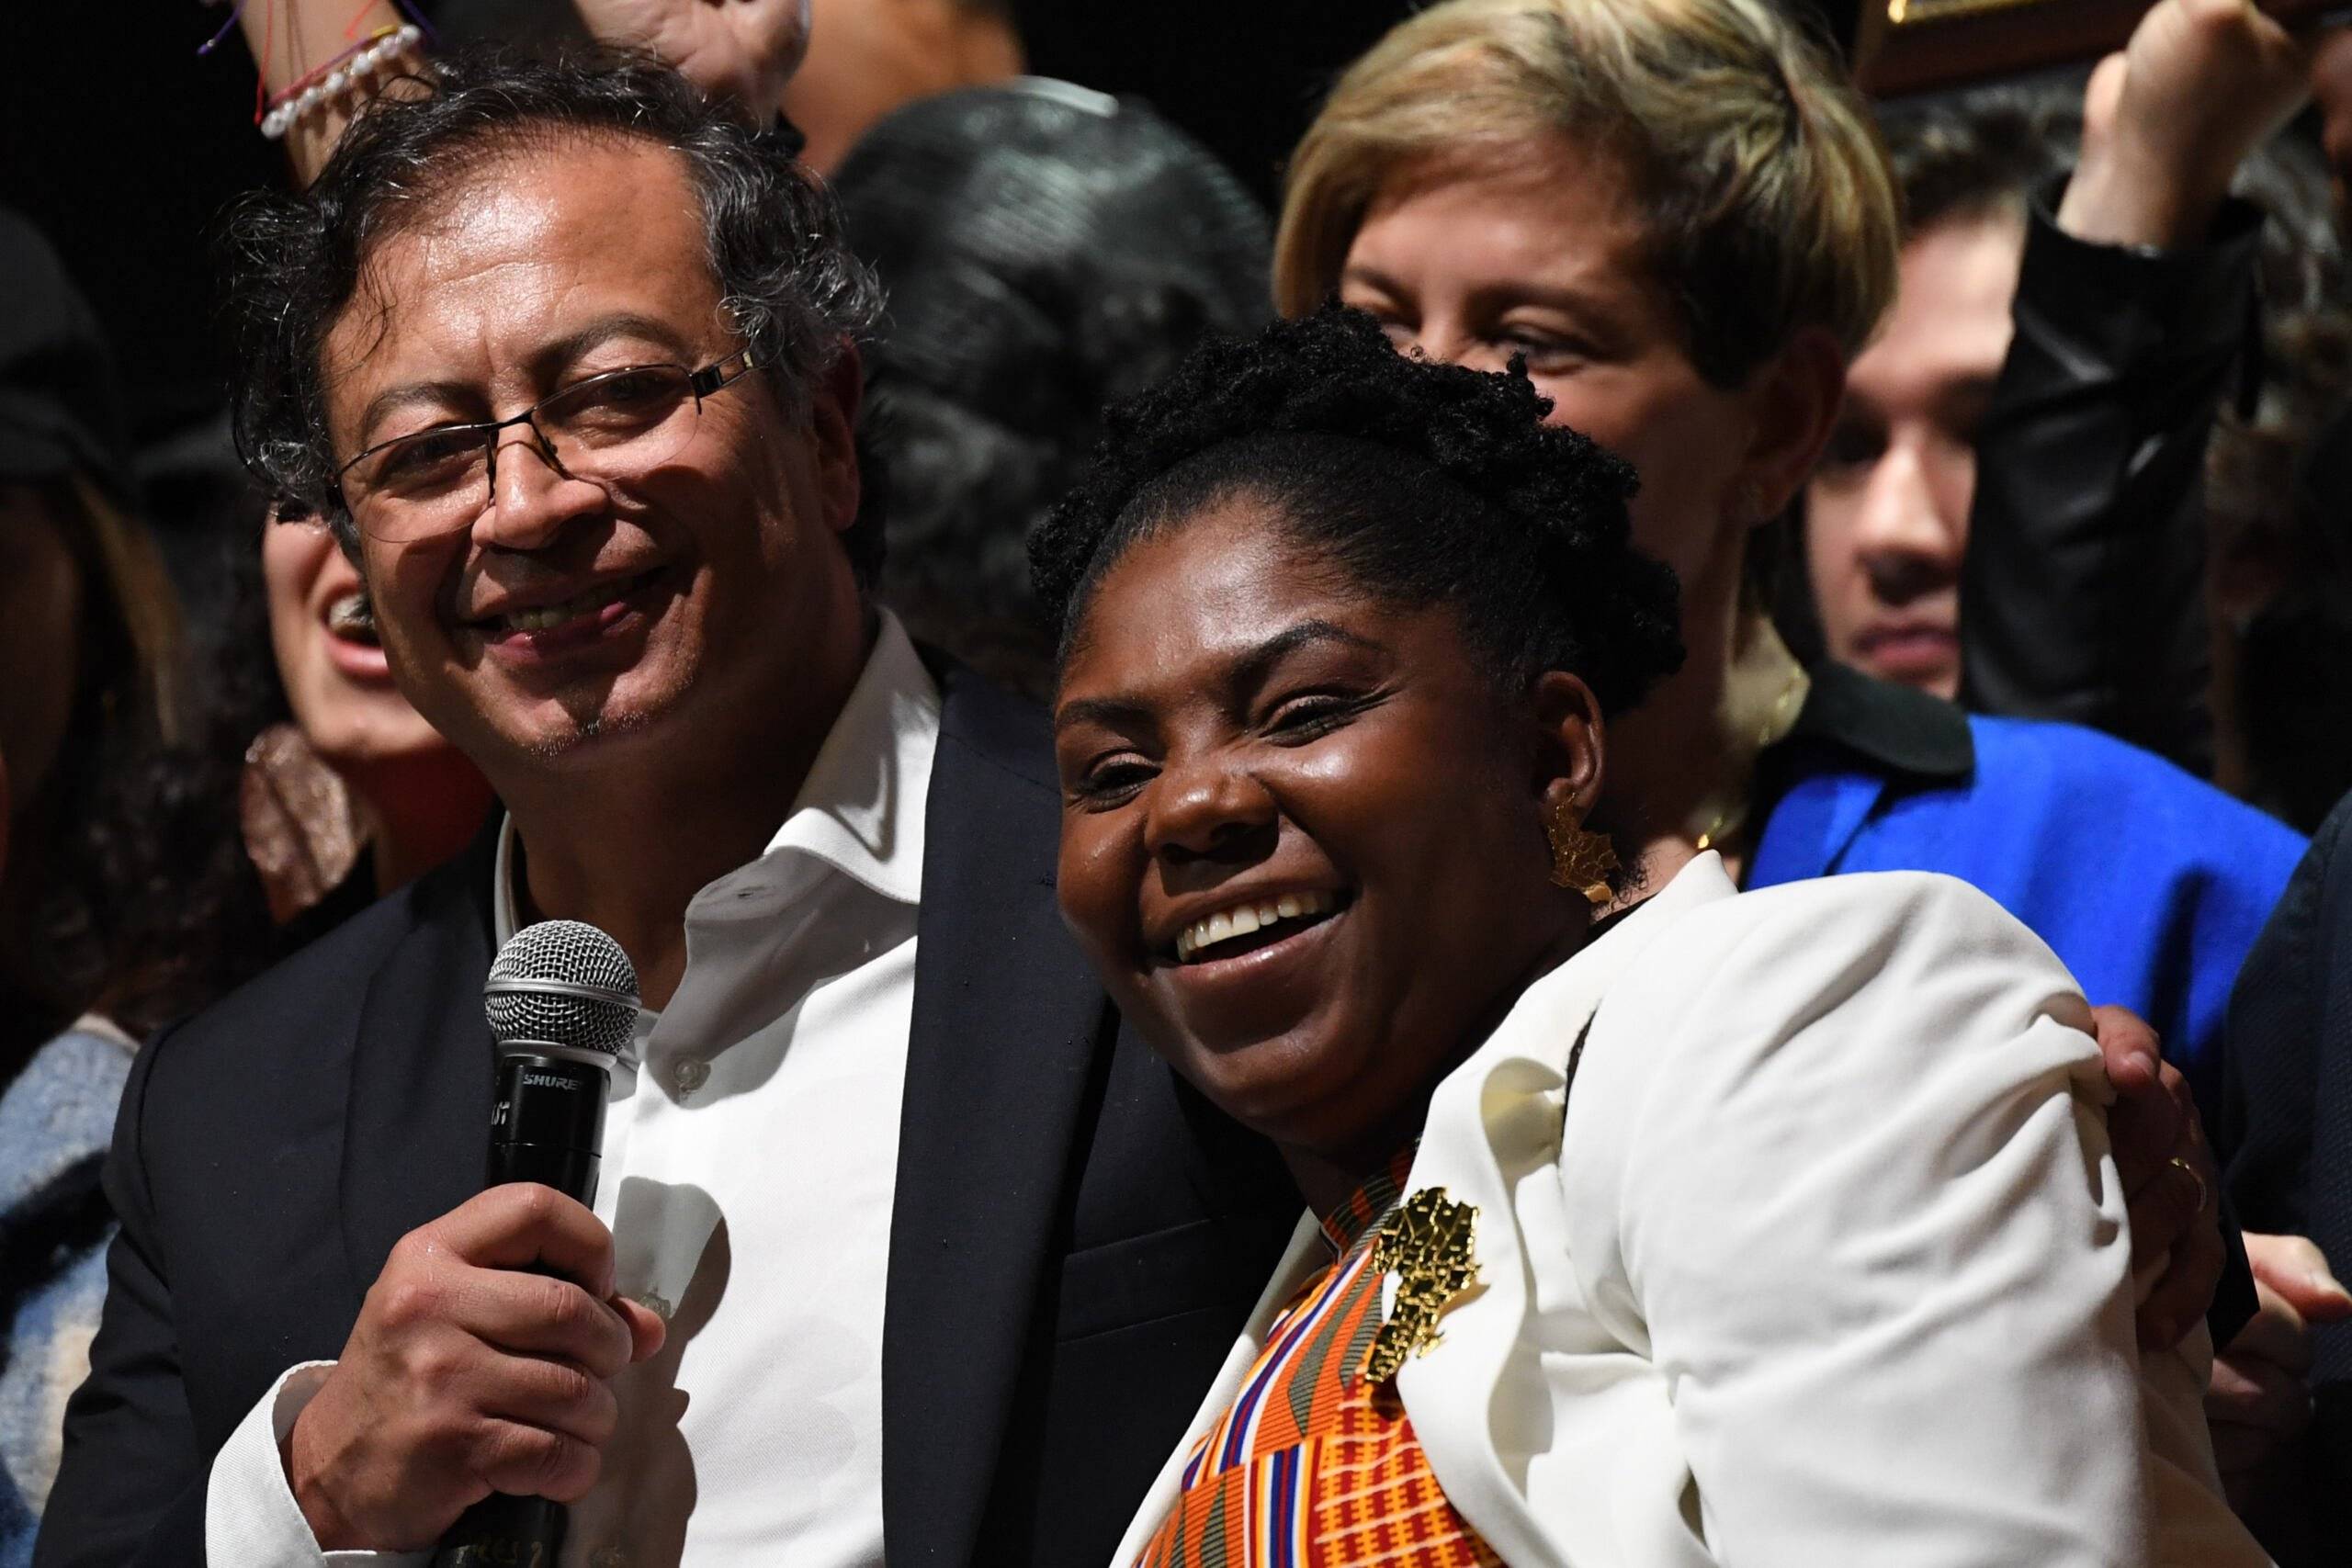 Newly elected Colombian President Gustavo Petro (C) and his running mate Francia Marquez (R) celebrate at the Movistar Arena in Bogota, on June 19, 2022 after winning the presidential runoff election on June 19, 2022. - Ex-guerrilla Gustavo Petro was on Sunday elected the first ever left-wing president of crisis-wracked Colombia after beating millionaire businessman rival Rodolfo Hernandez after a tense and unpredictable election. (Photo by Daniel MUNOZ / AFP)